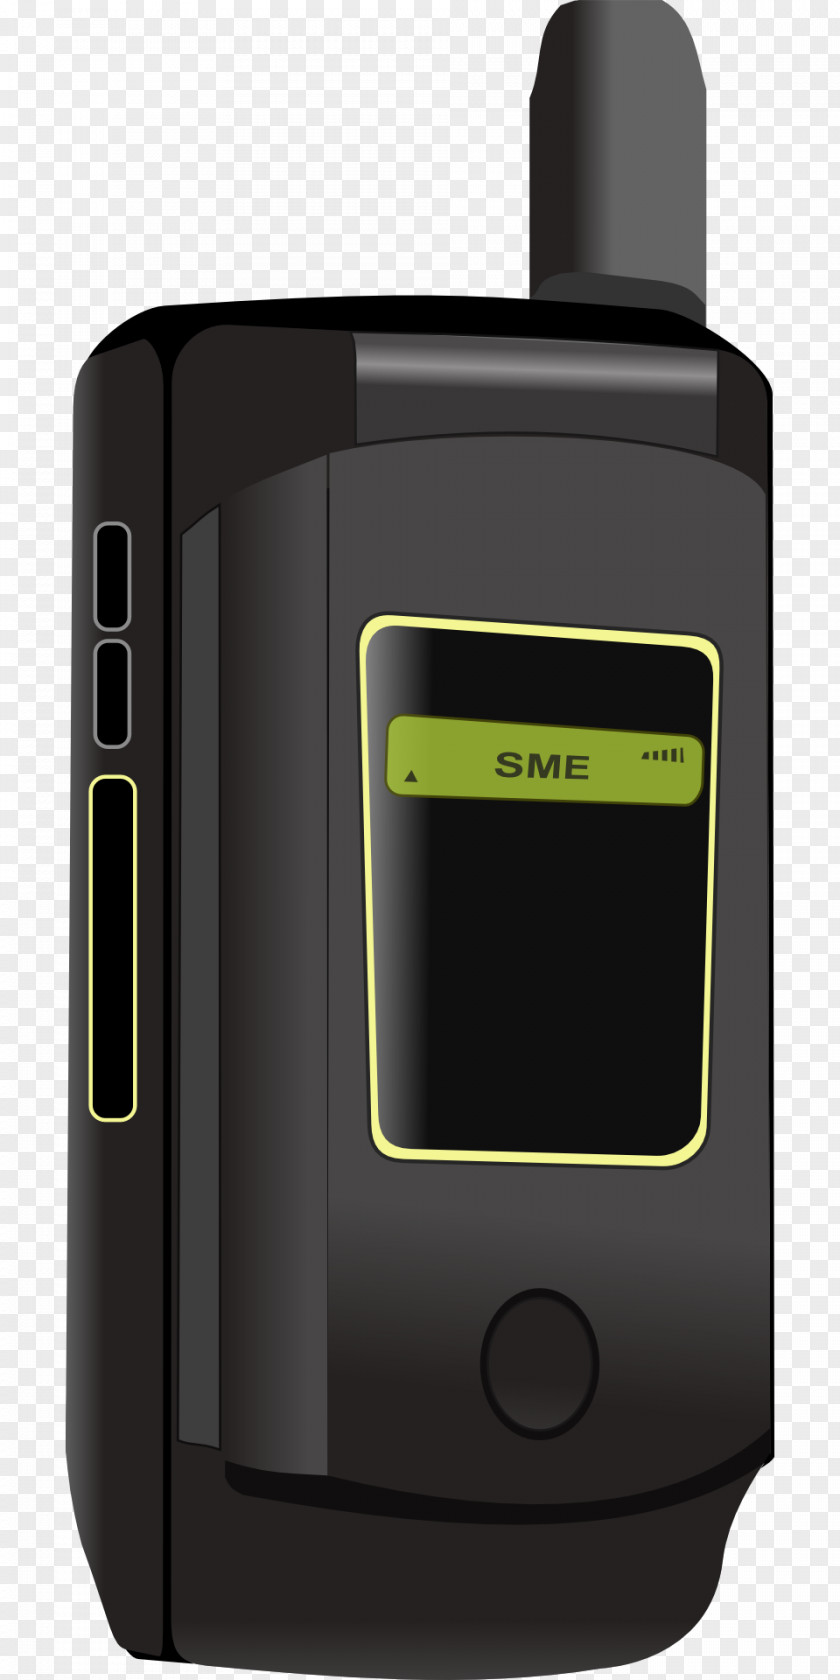 Iphone Telephone Portable Communications Device IPhone Telephony Clamshell Design PNG